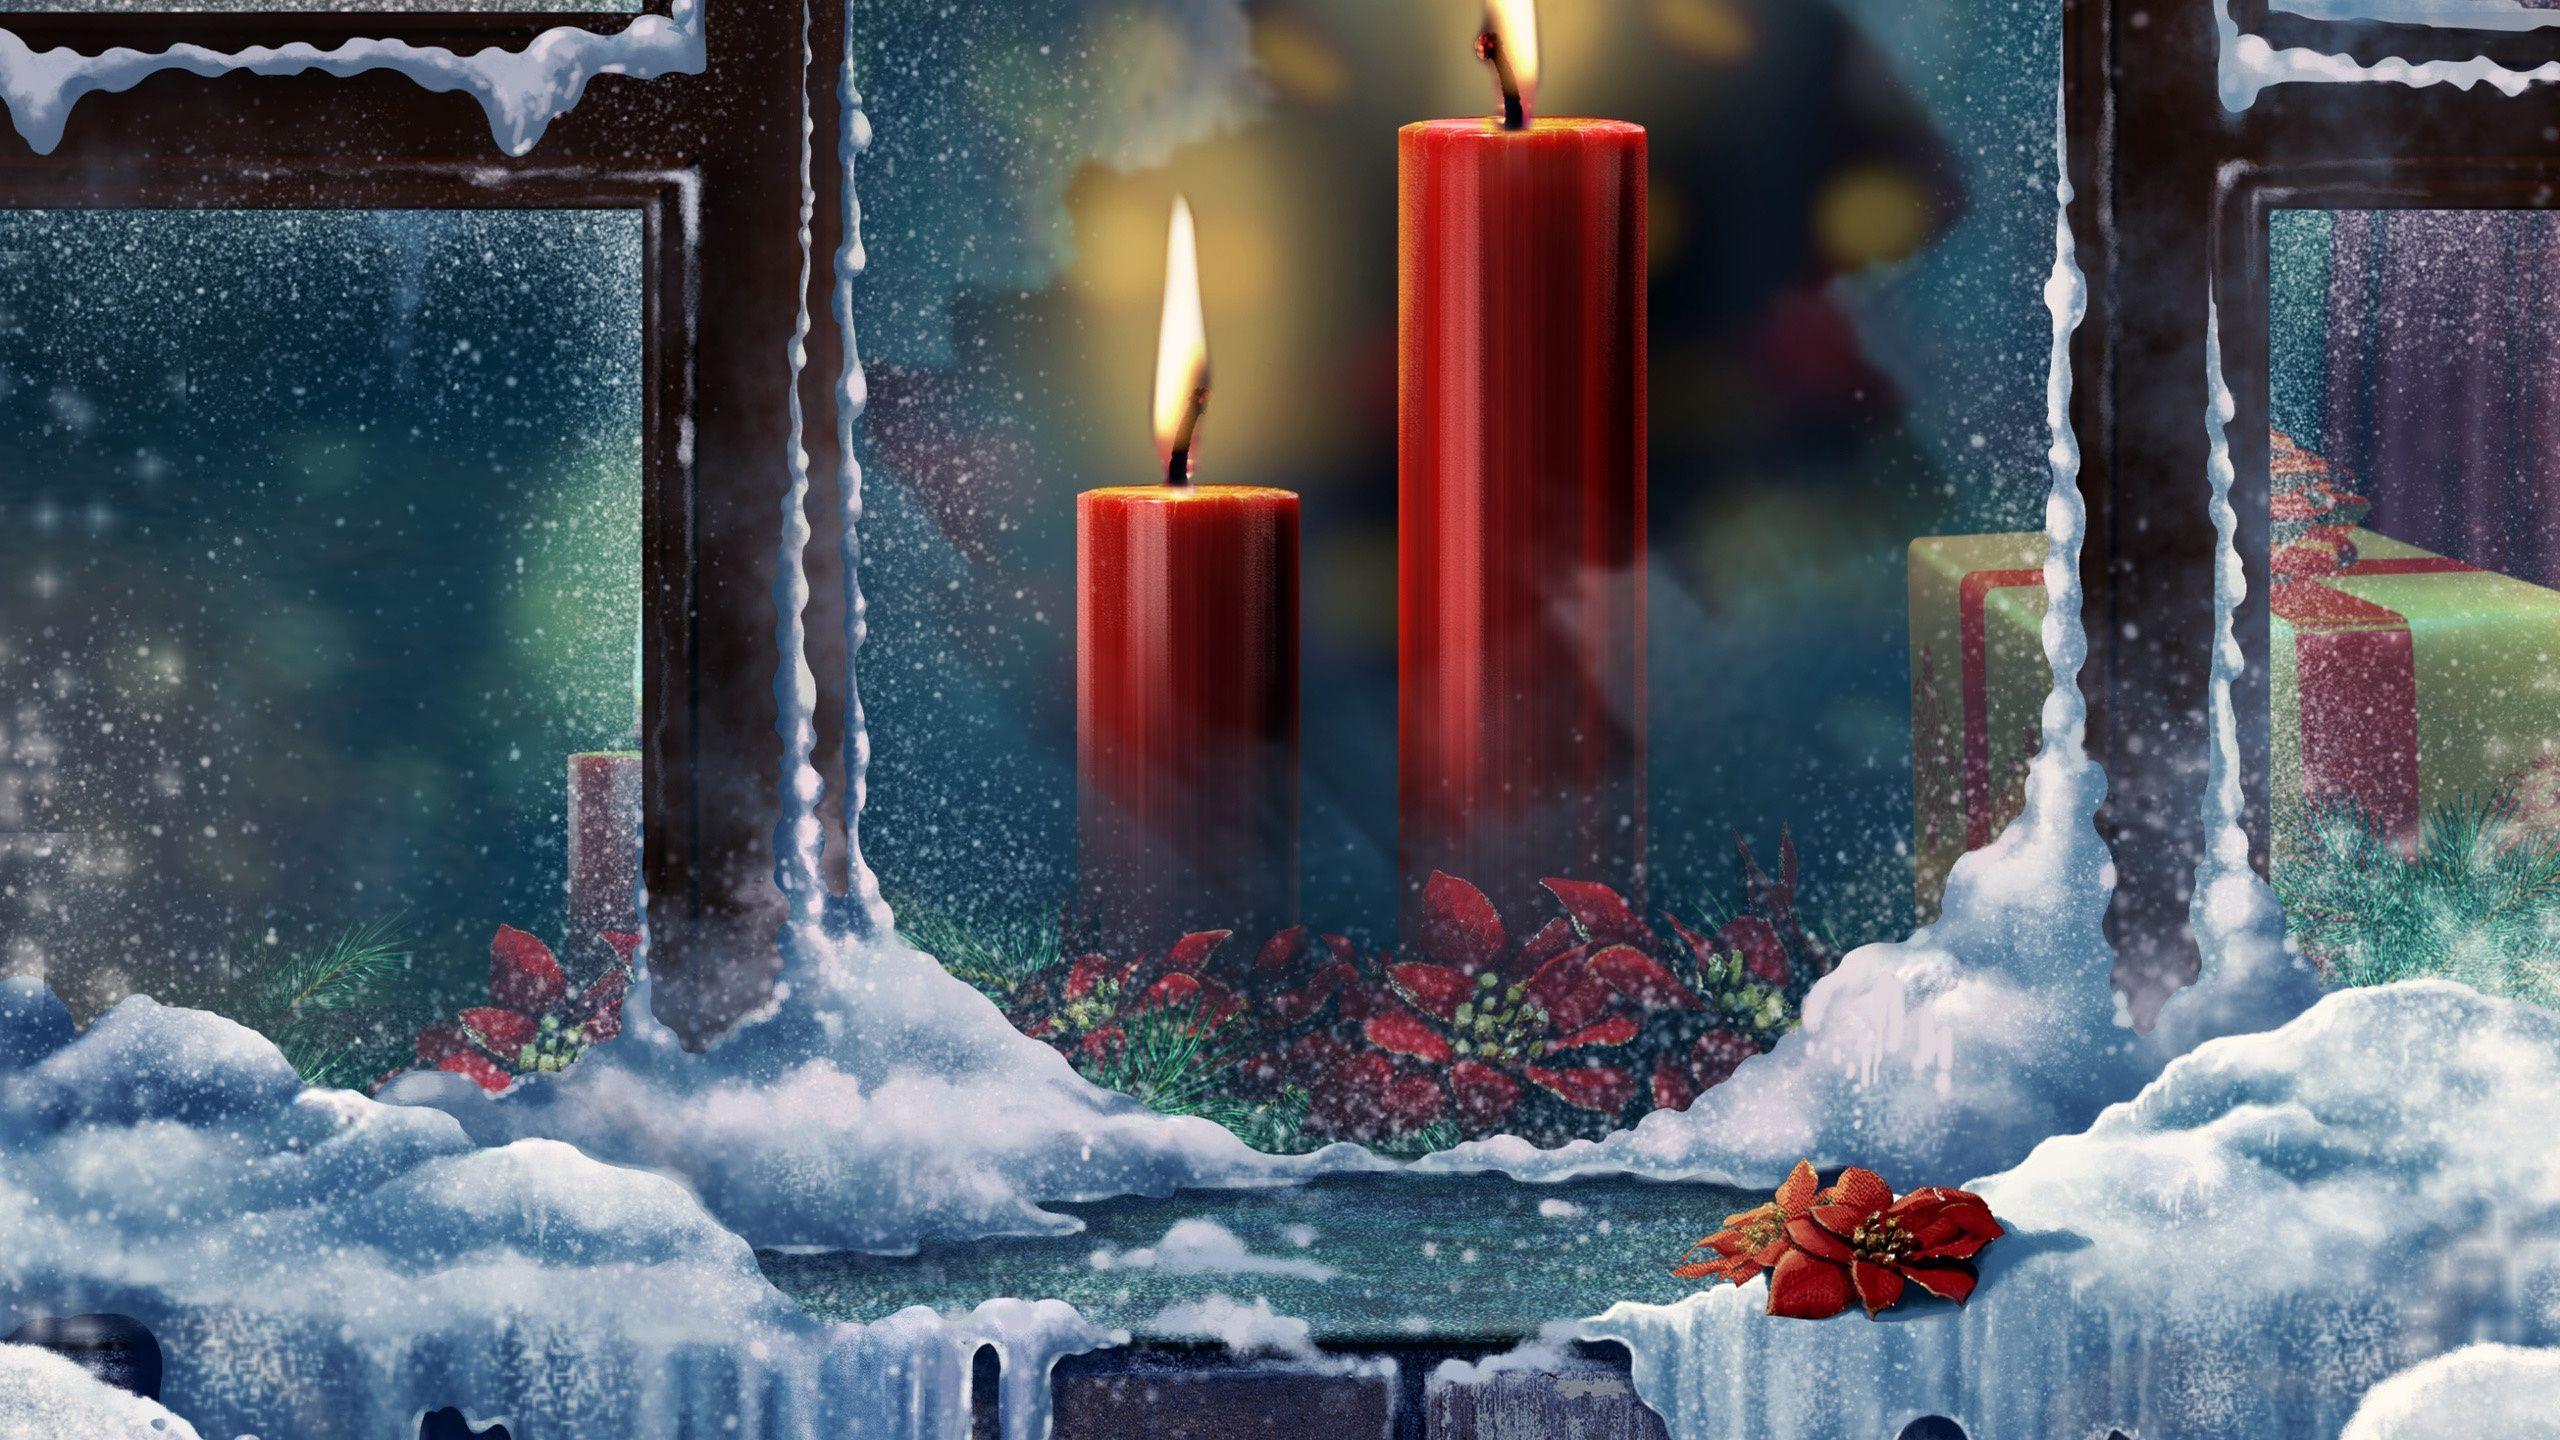 Burning candles outside the window on Christmas wallpaper